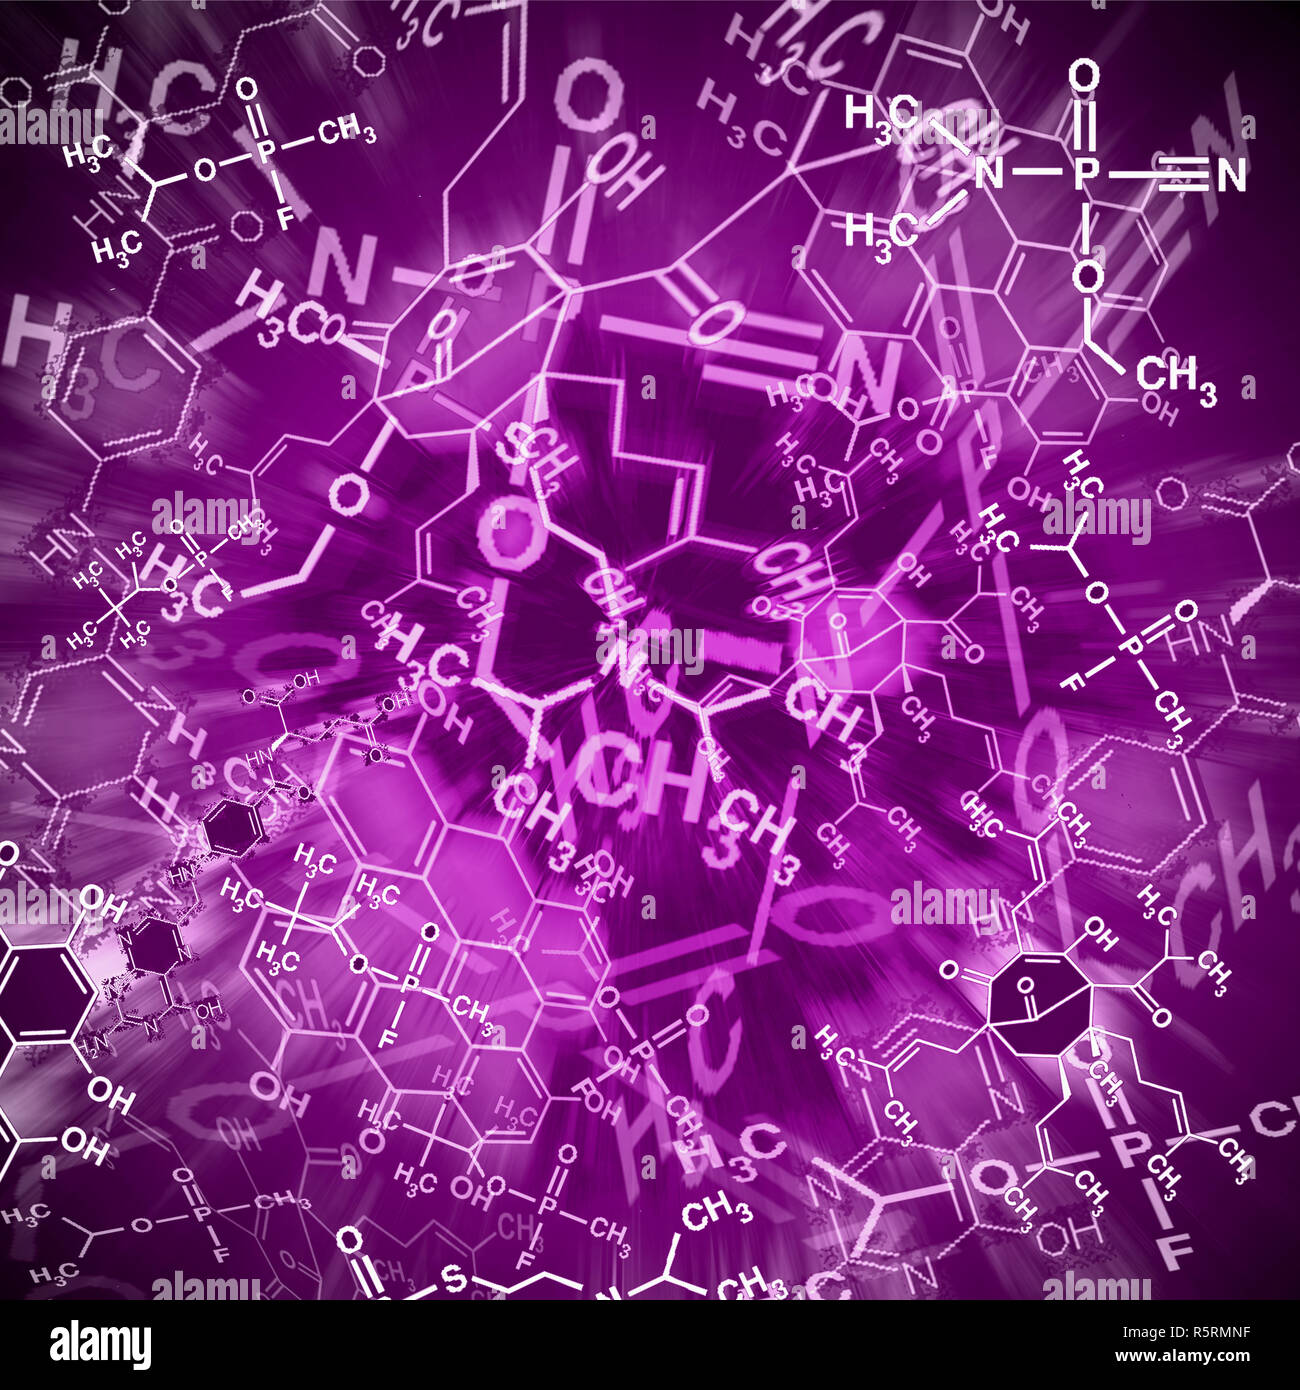 Image of chemical technology abstract background Science